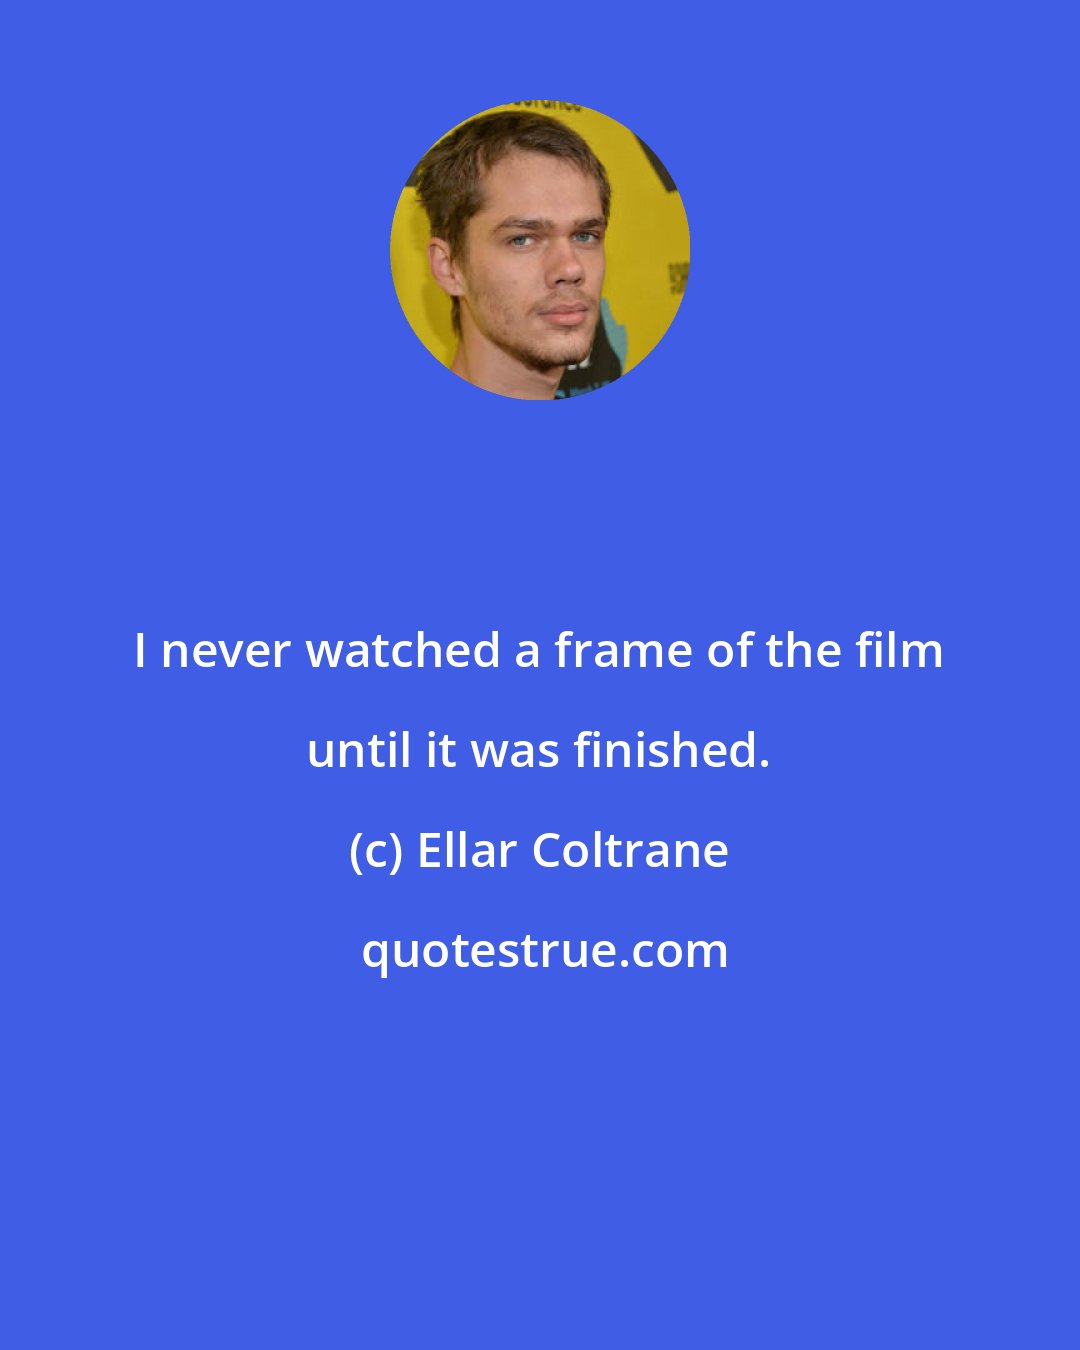 Ellar Coltrane: I never watched a frame of the film until it was finished.